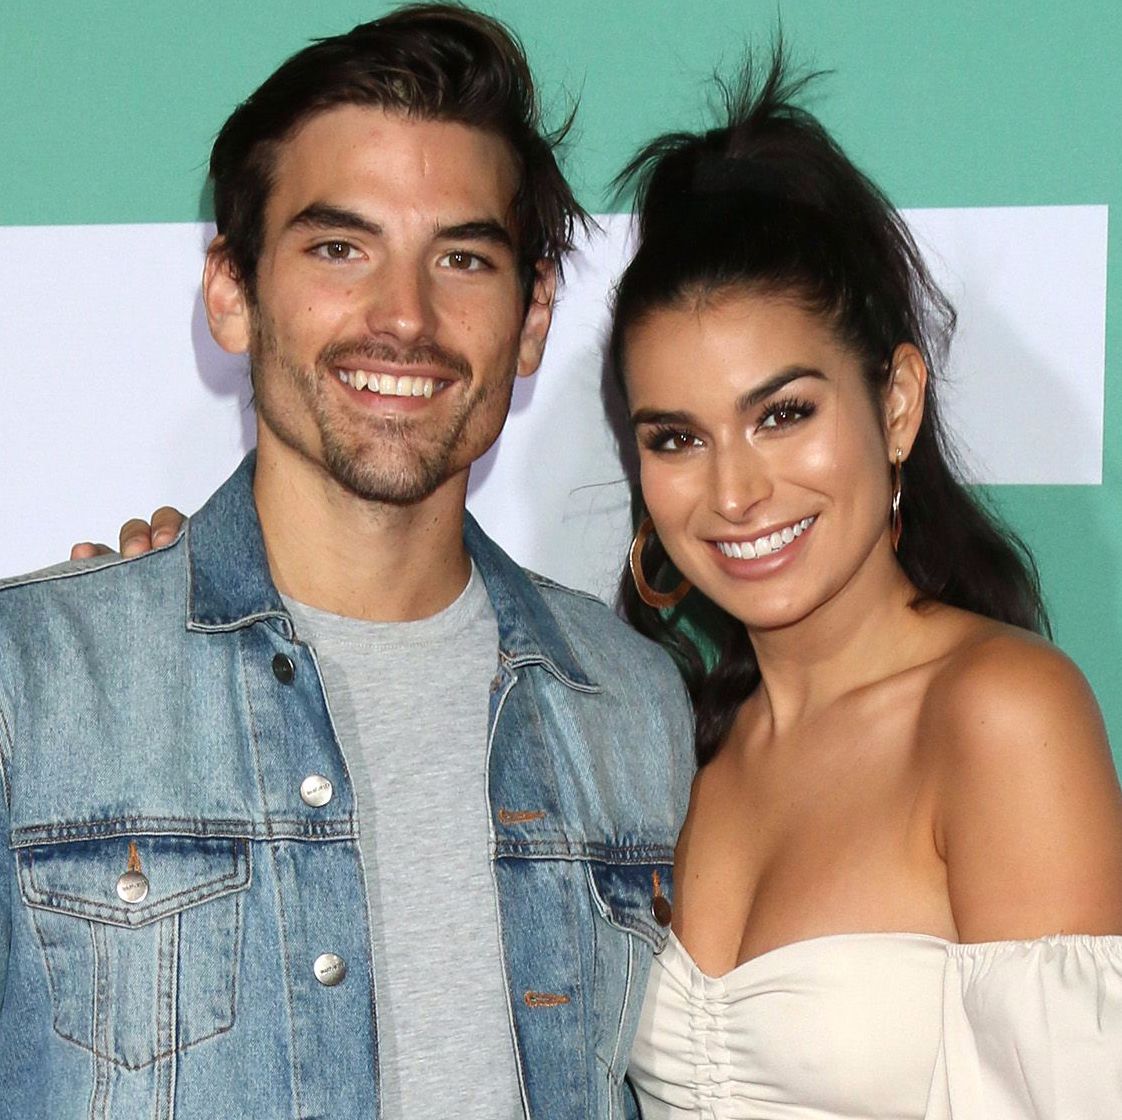 Jared Haibon wears a jean jacket with Ashley Iaconetti in a strapless top.